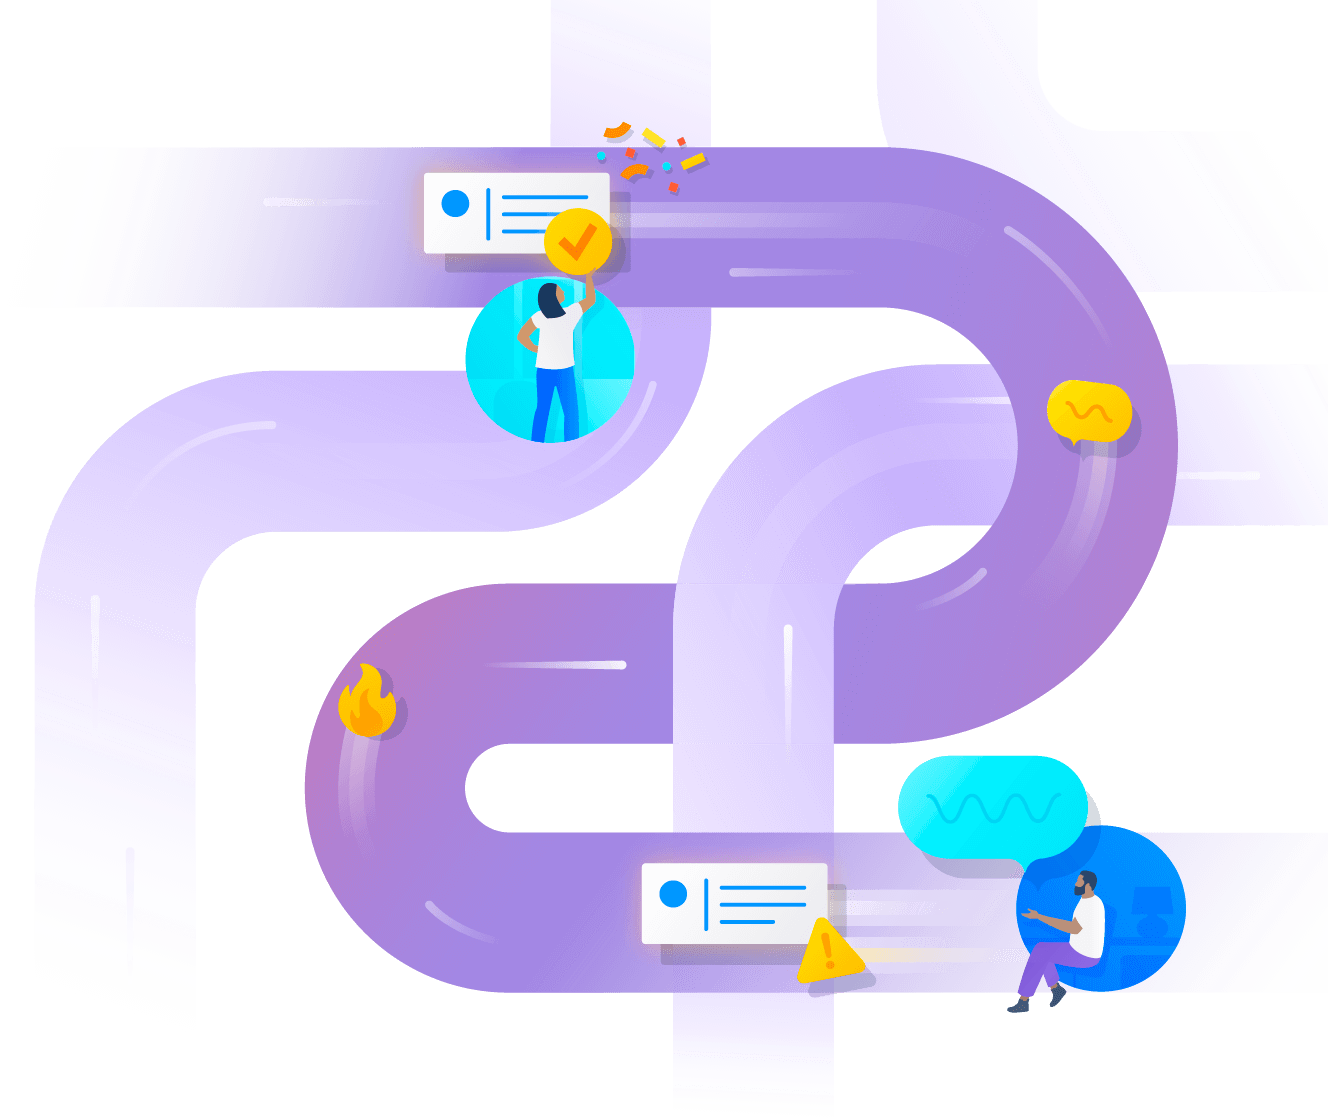 Connect Jira Service management visual image - multiple pipes connecting